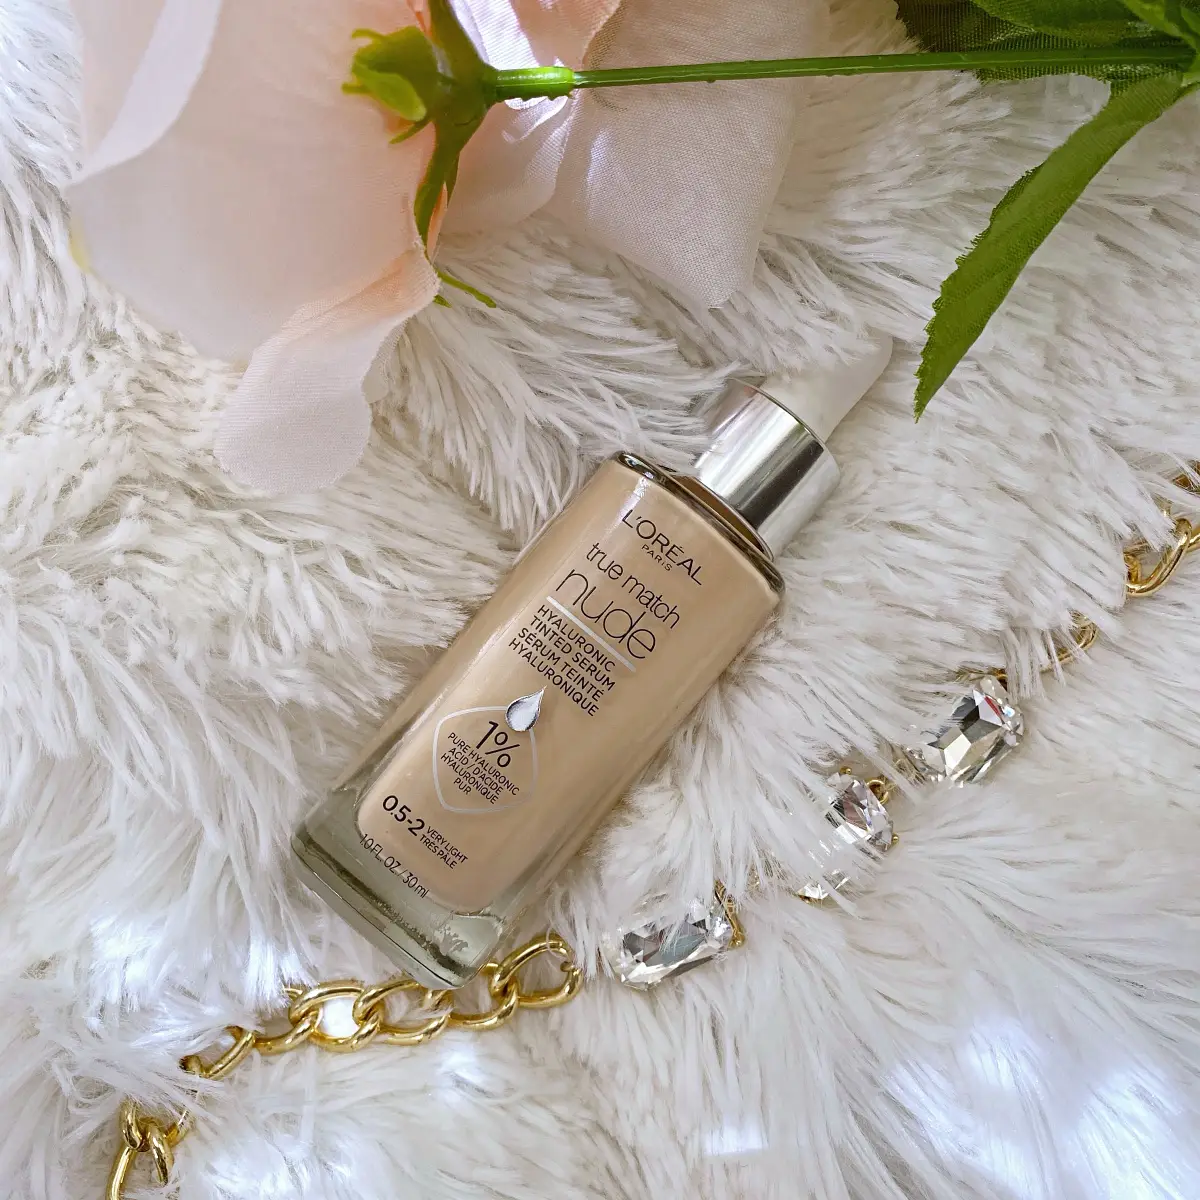 L'Oreal True Match Hyaluronic Tinted Serum Review